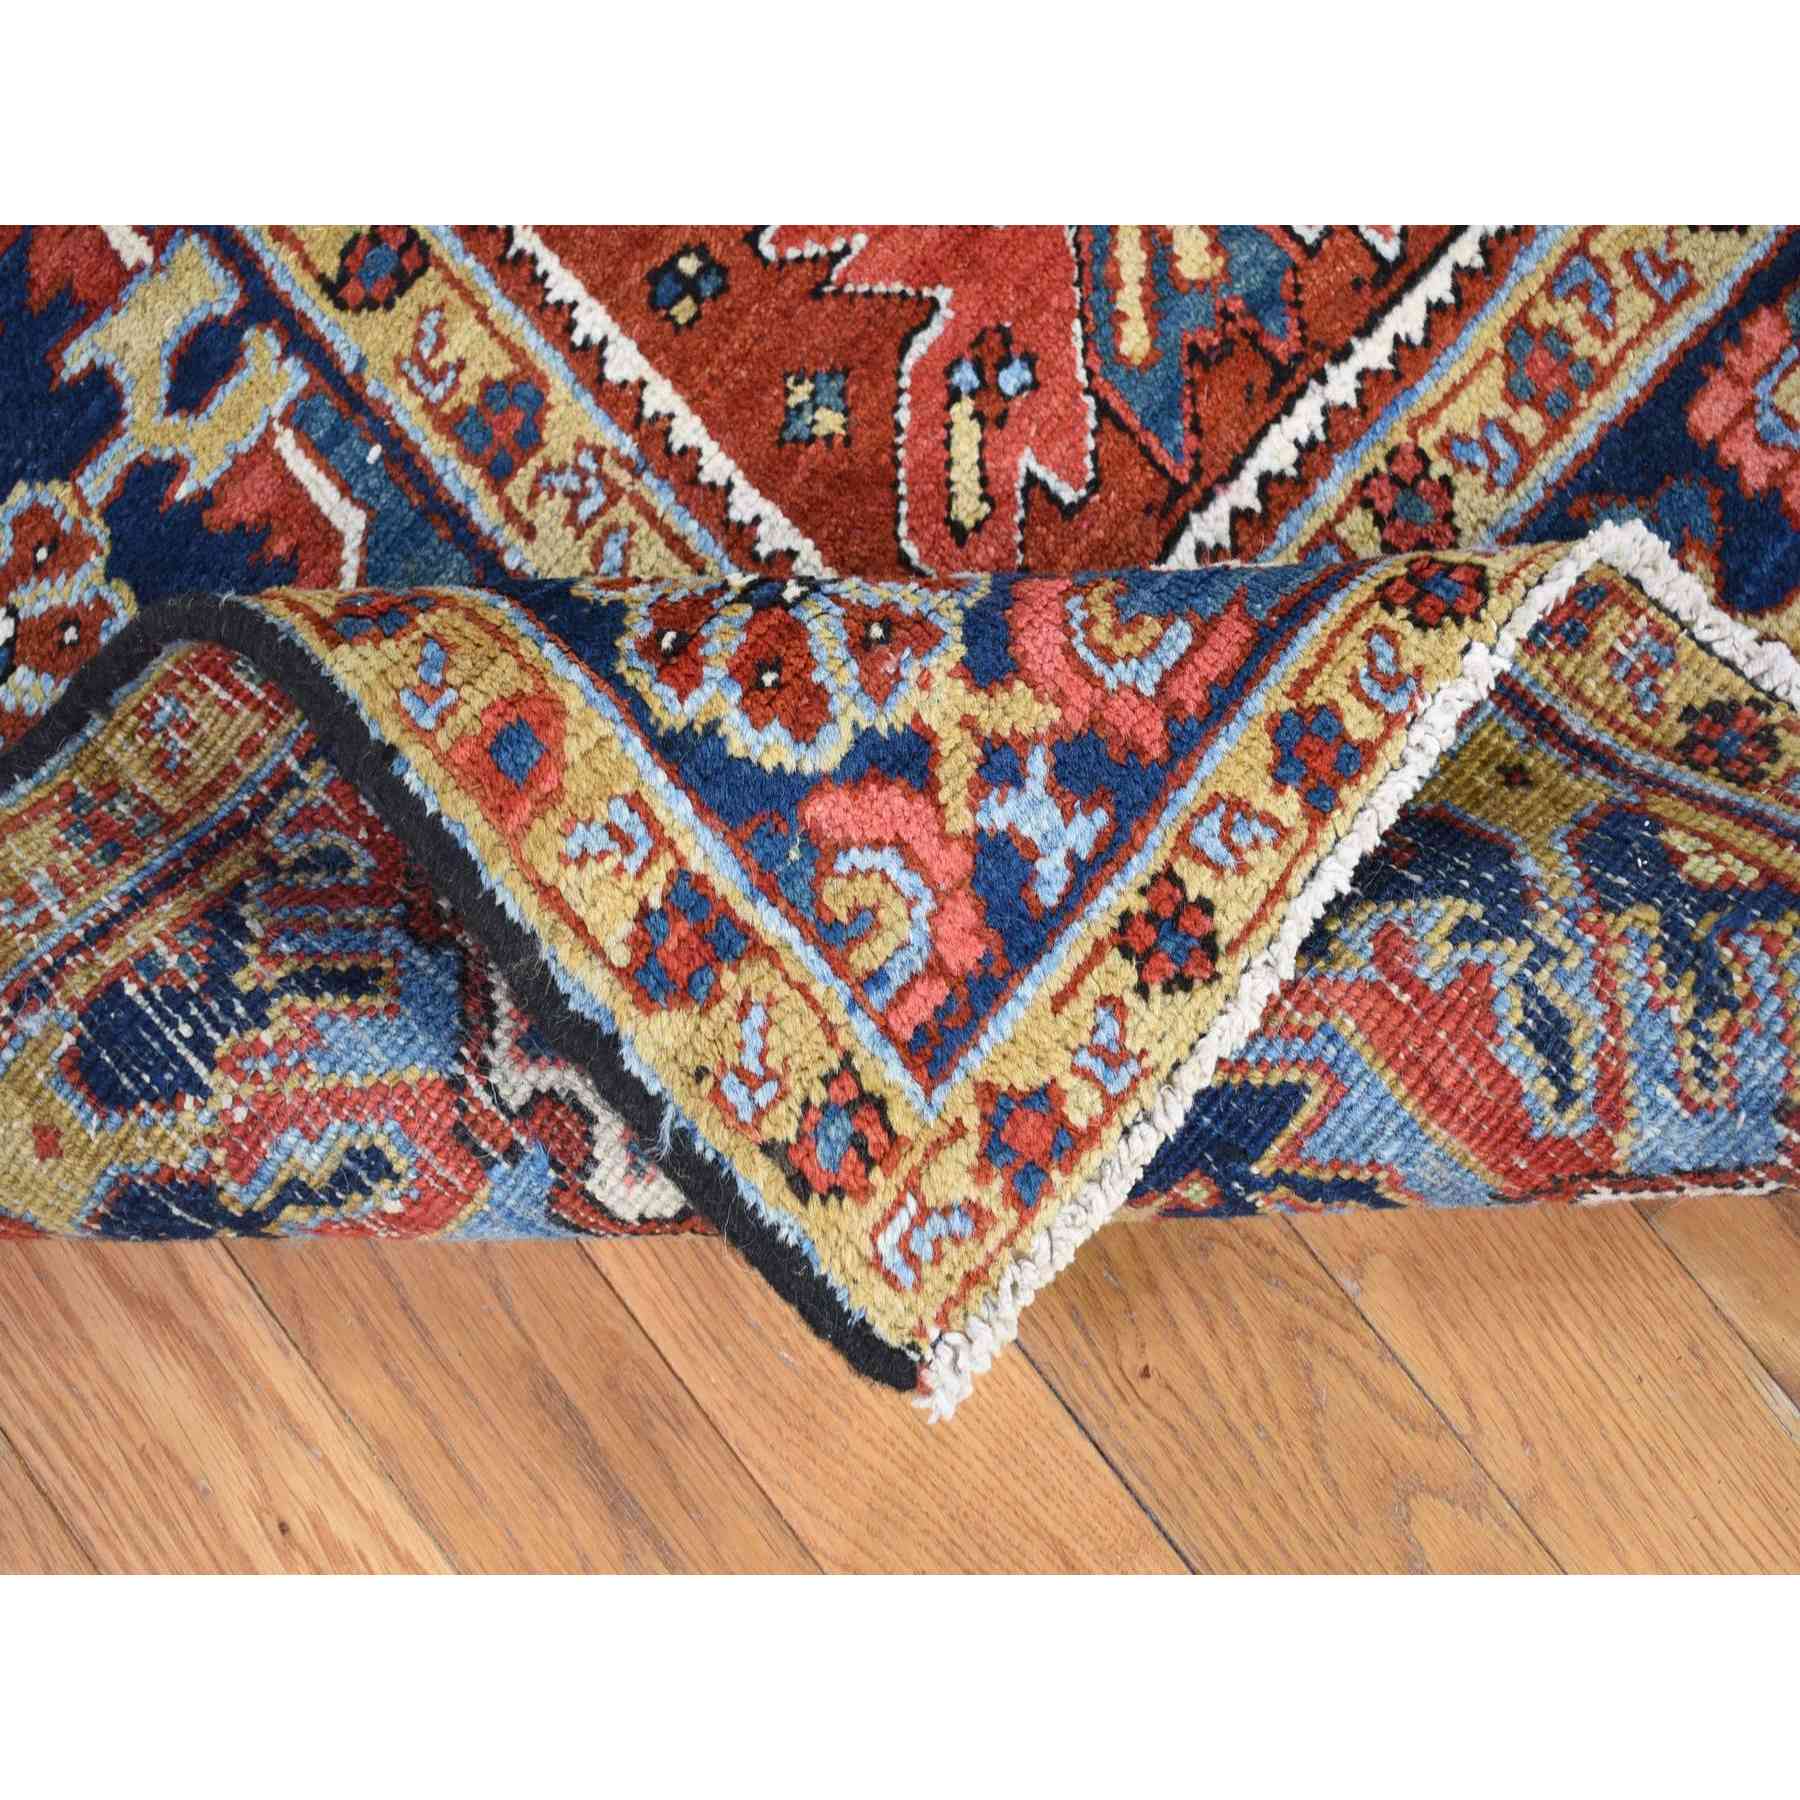 Antique-Hand-Knotted-Rug-400605